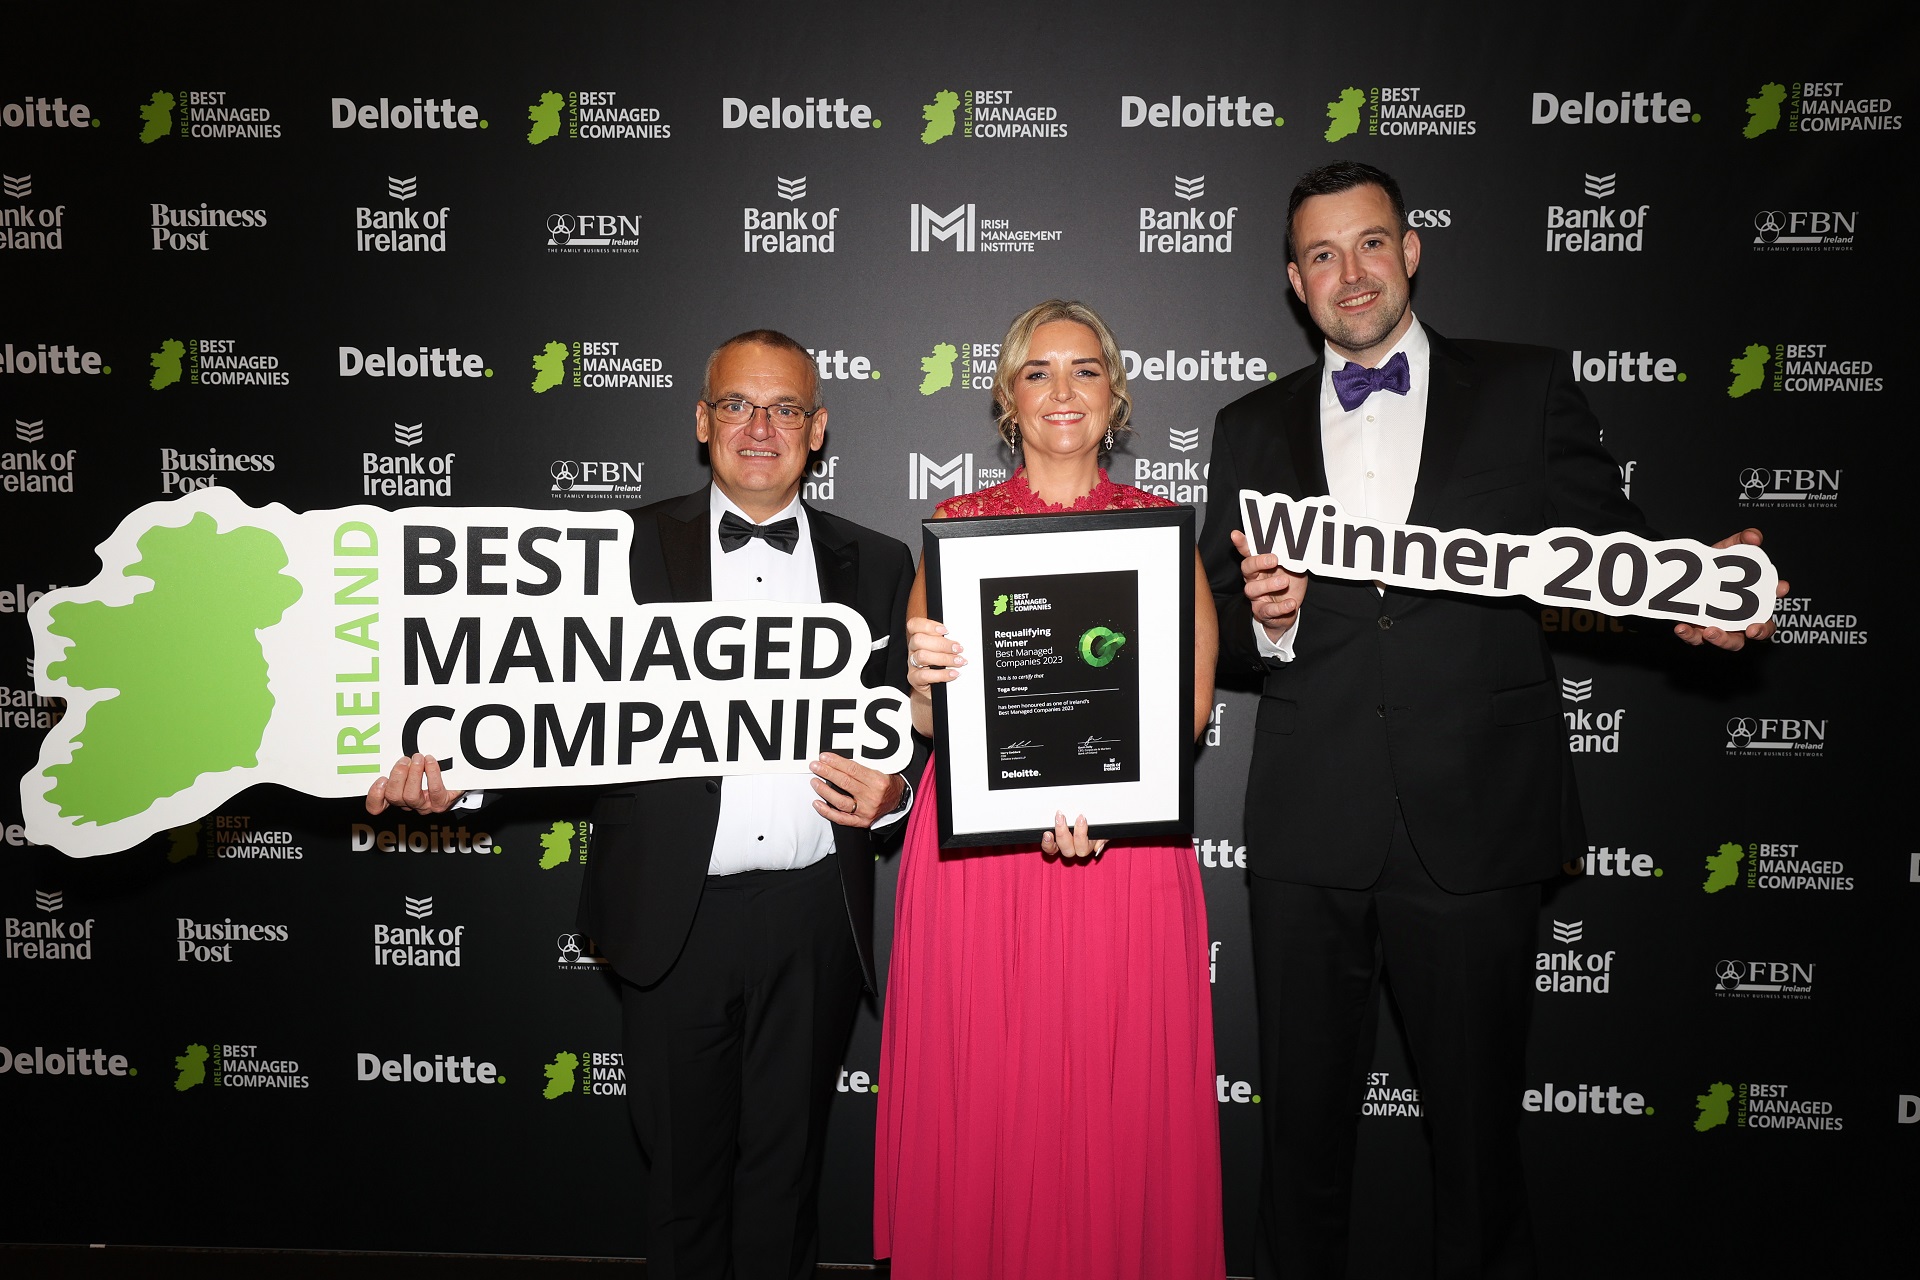 TOGA celebrate at the Deloitte Best Managed Companies Awards 2023